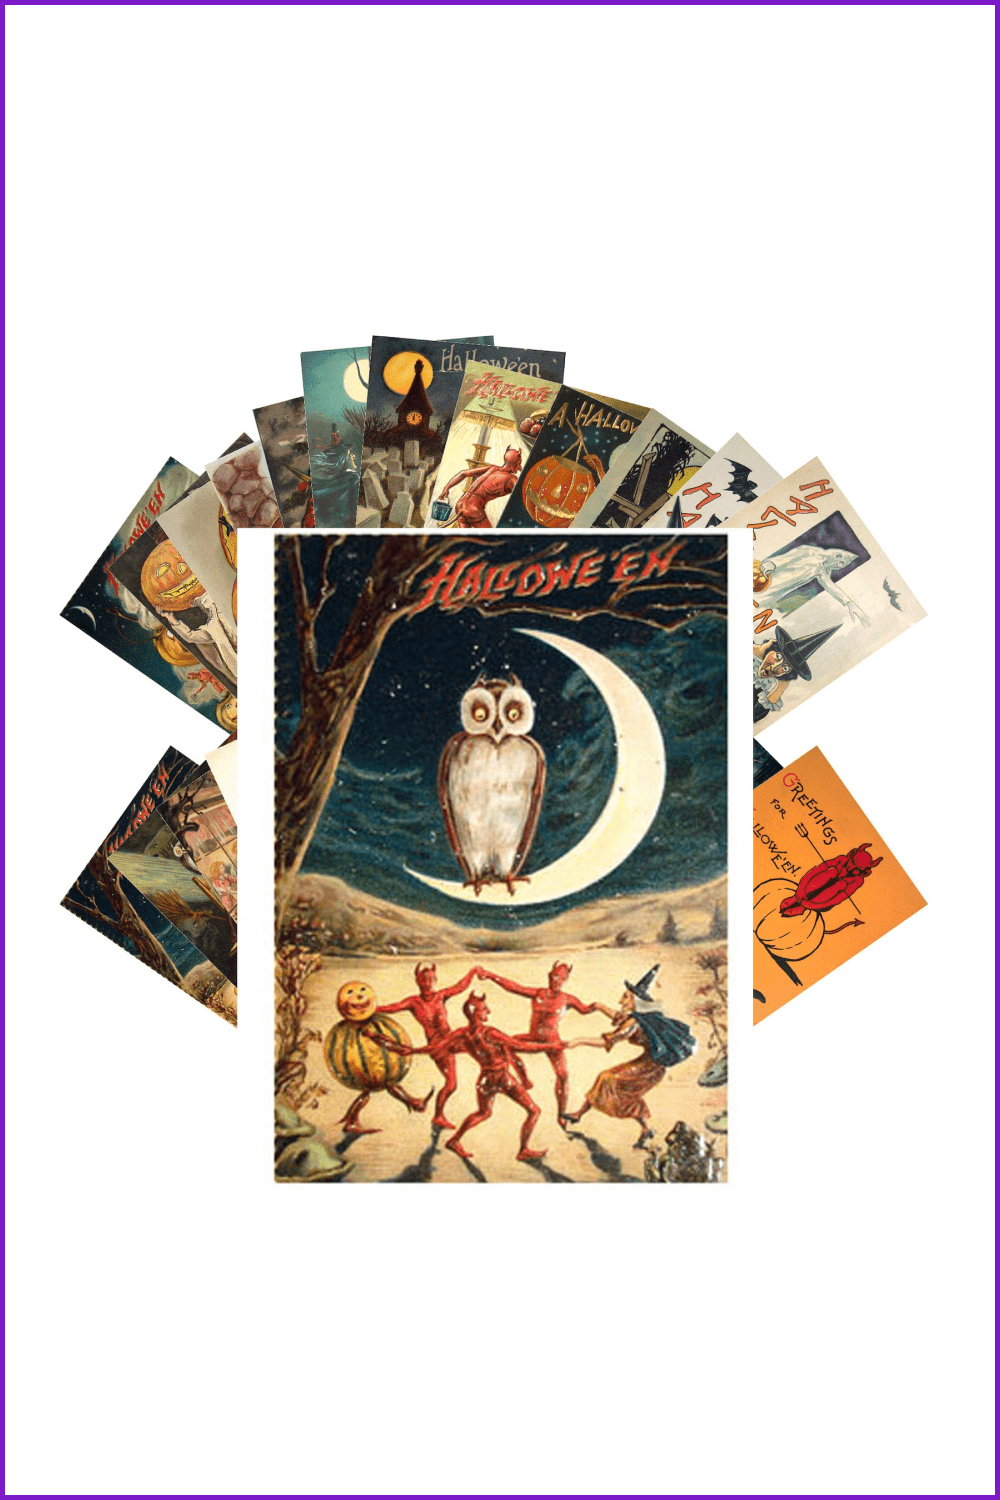 Collage of vintage postcards for Halloween.